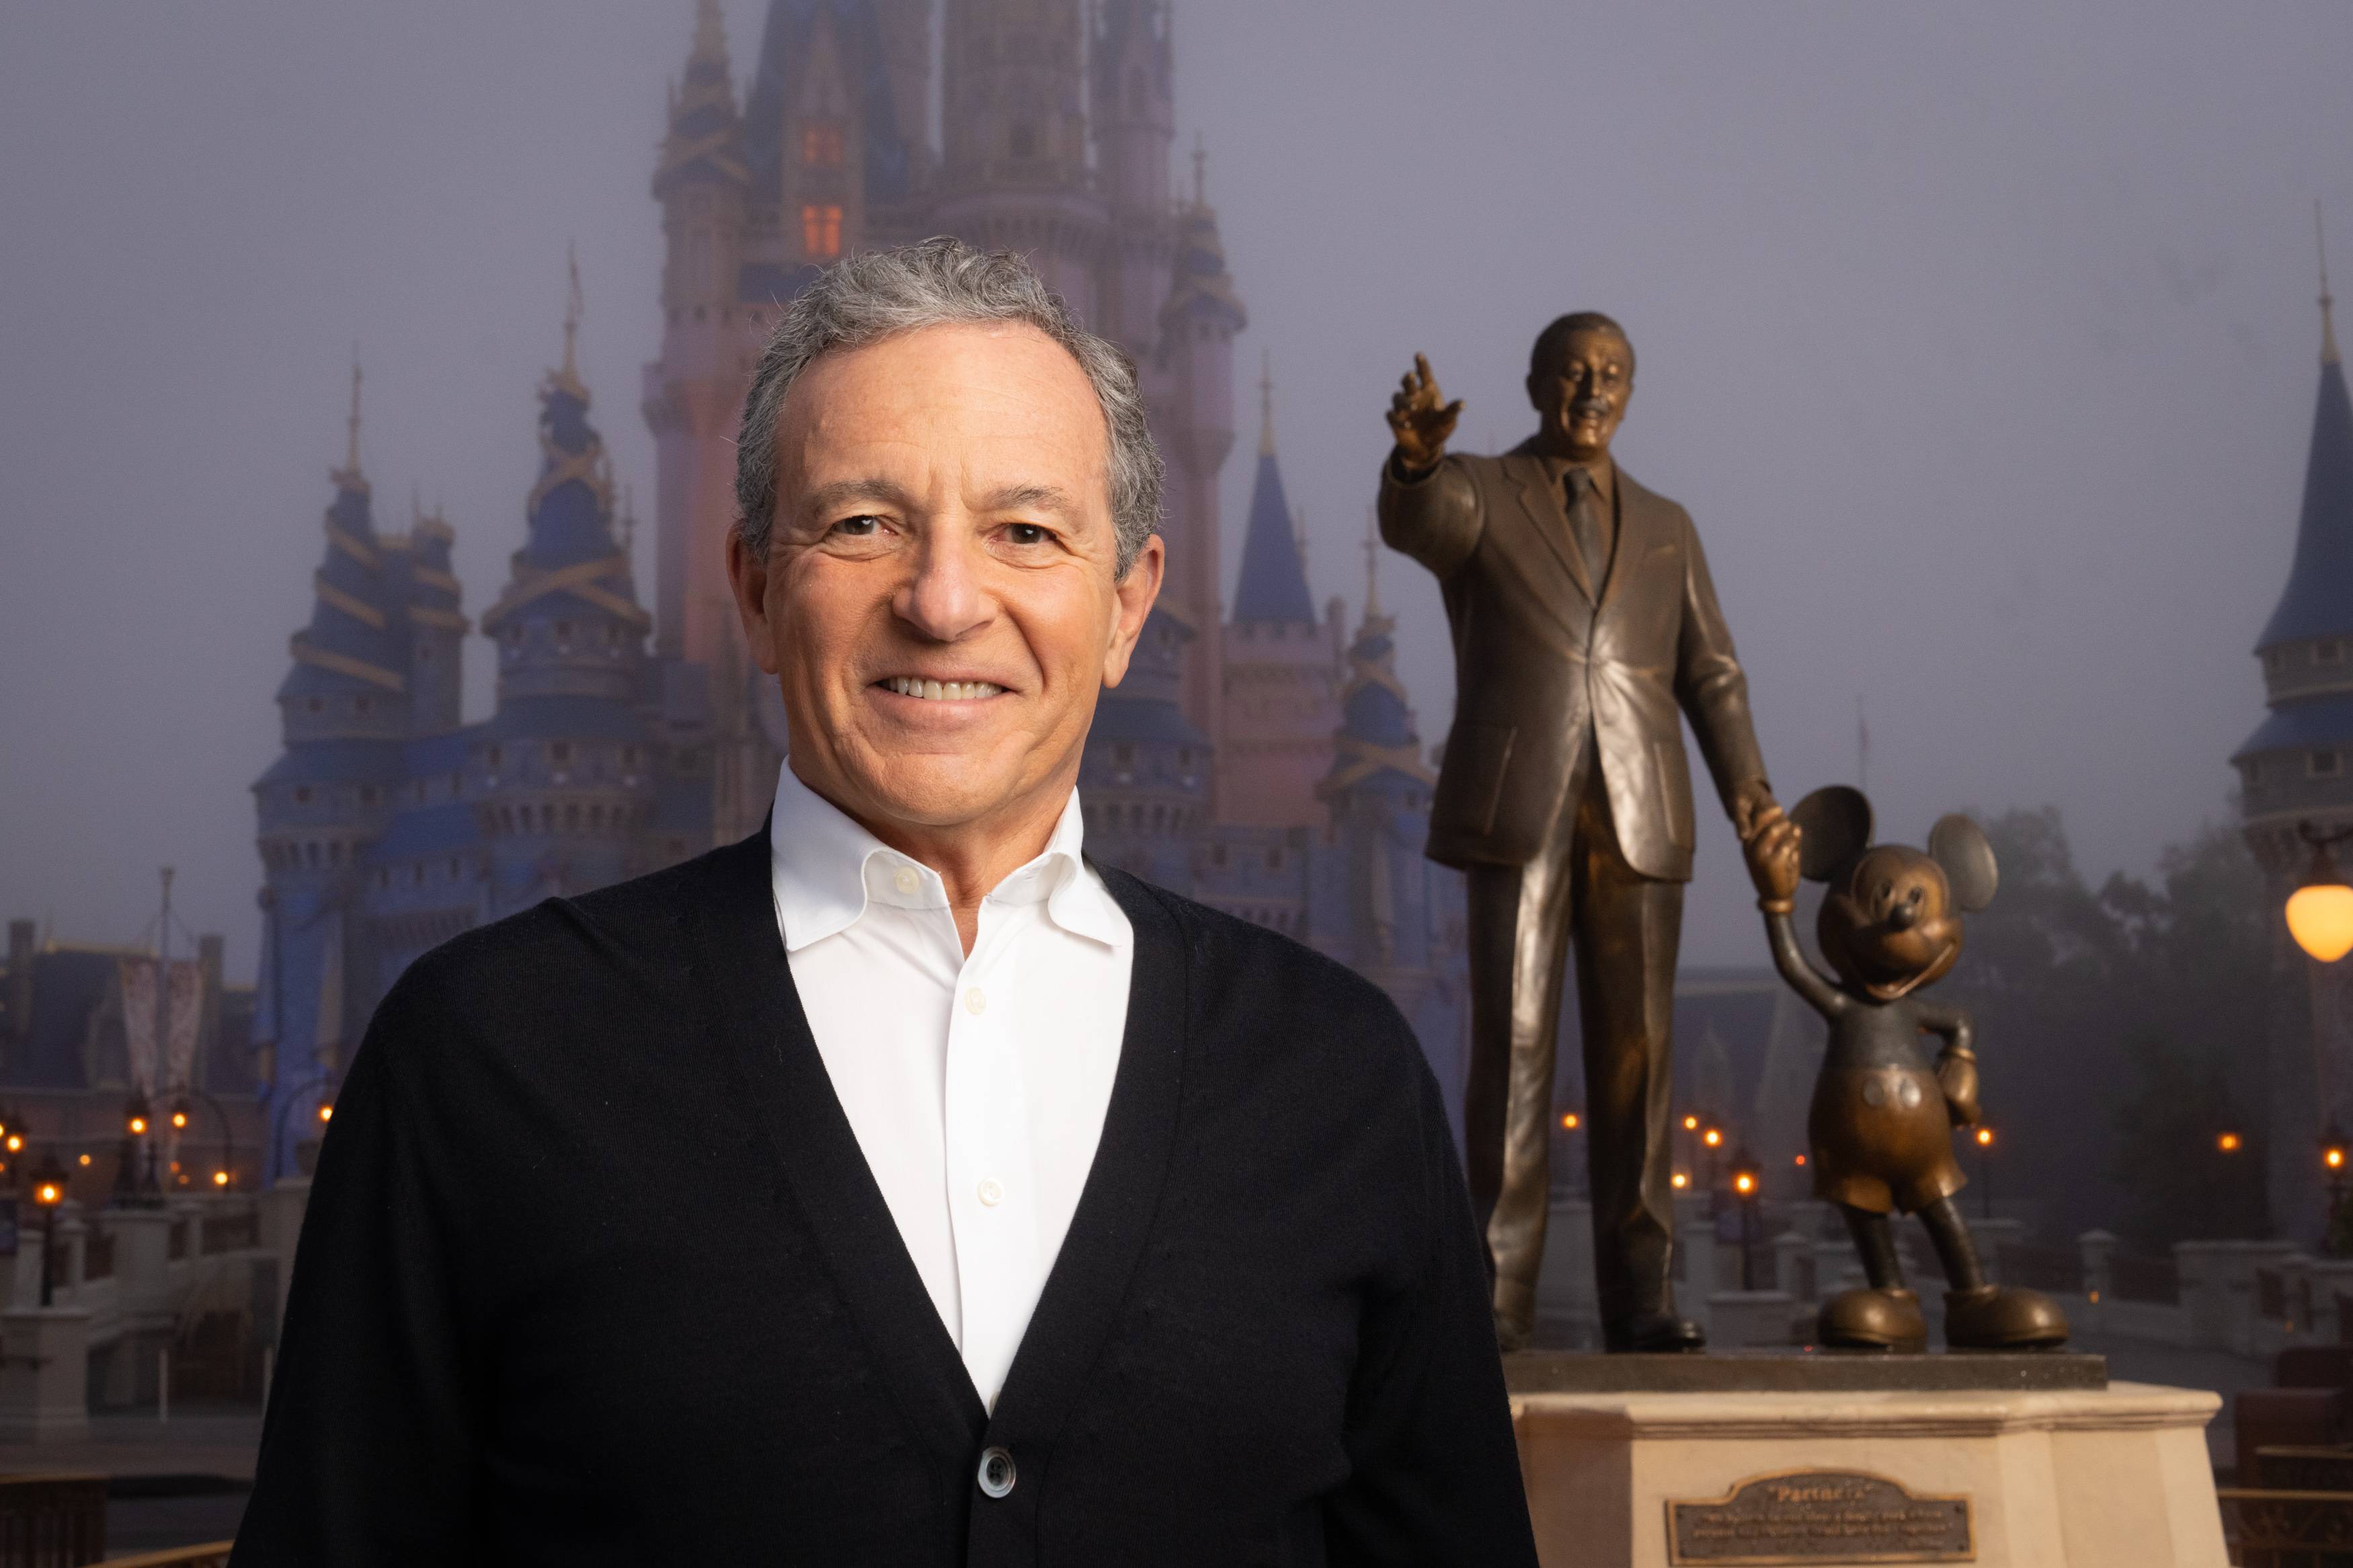 Disney CEO Bob Iger says that theme park demand is softening from peak post-COVID travel